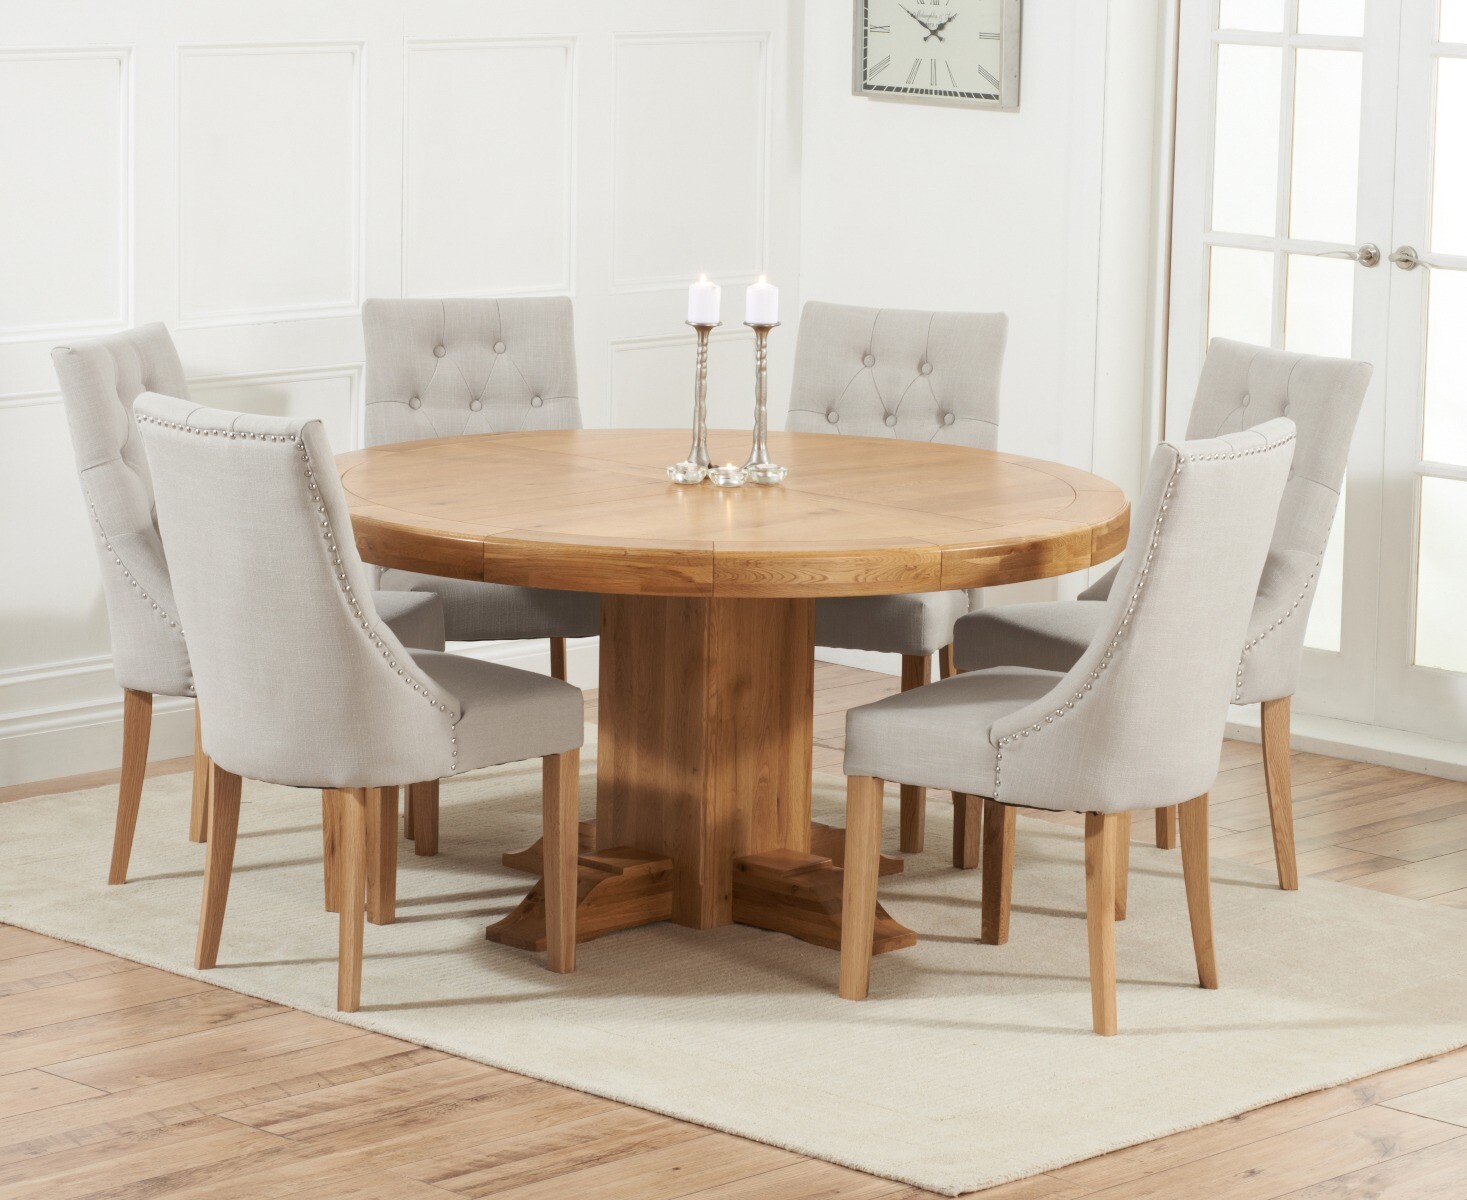 Photo 2 of Helmsley 150cm round oak dining table with 6 natural beatrix chairs